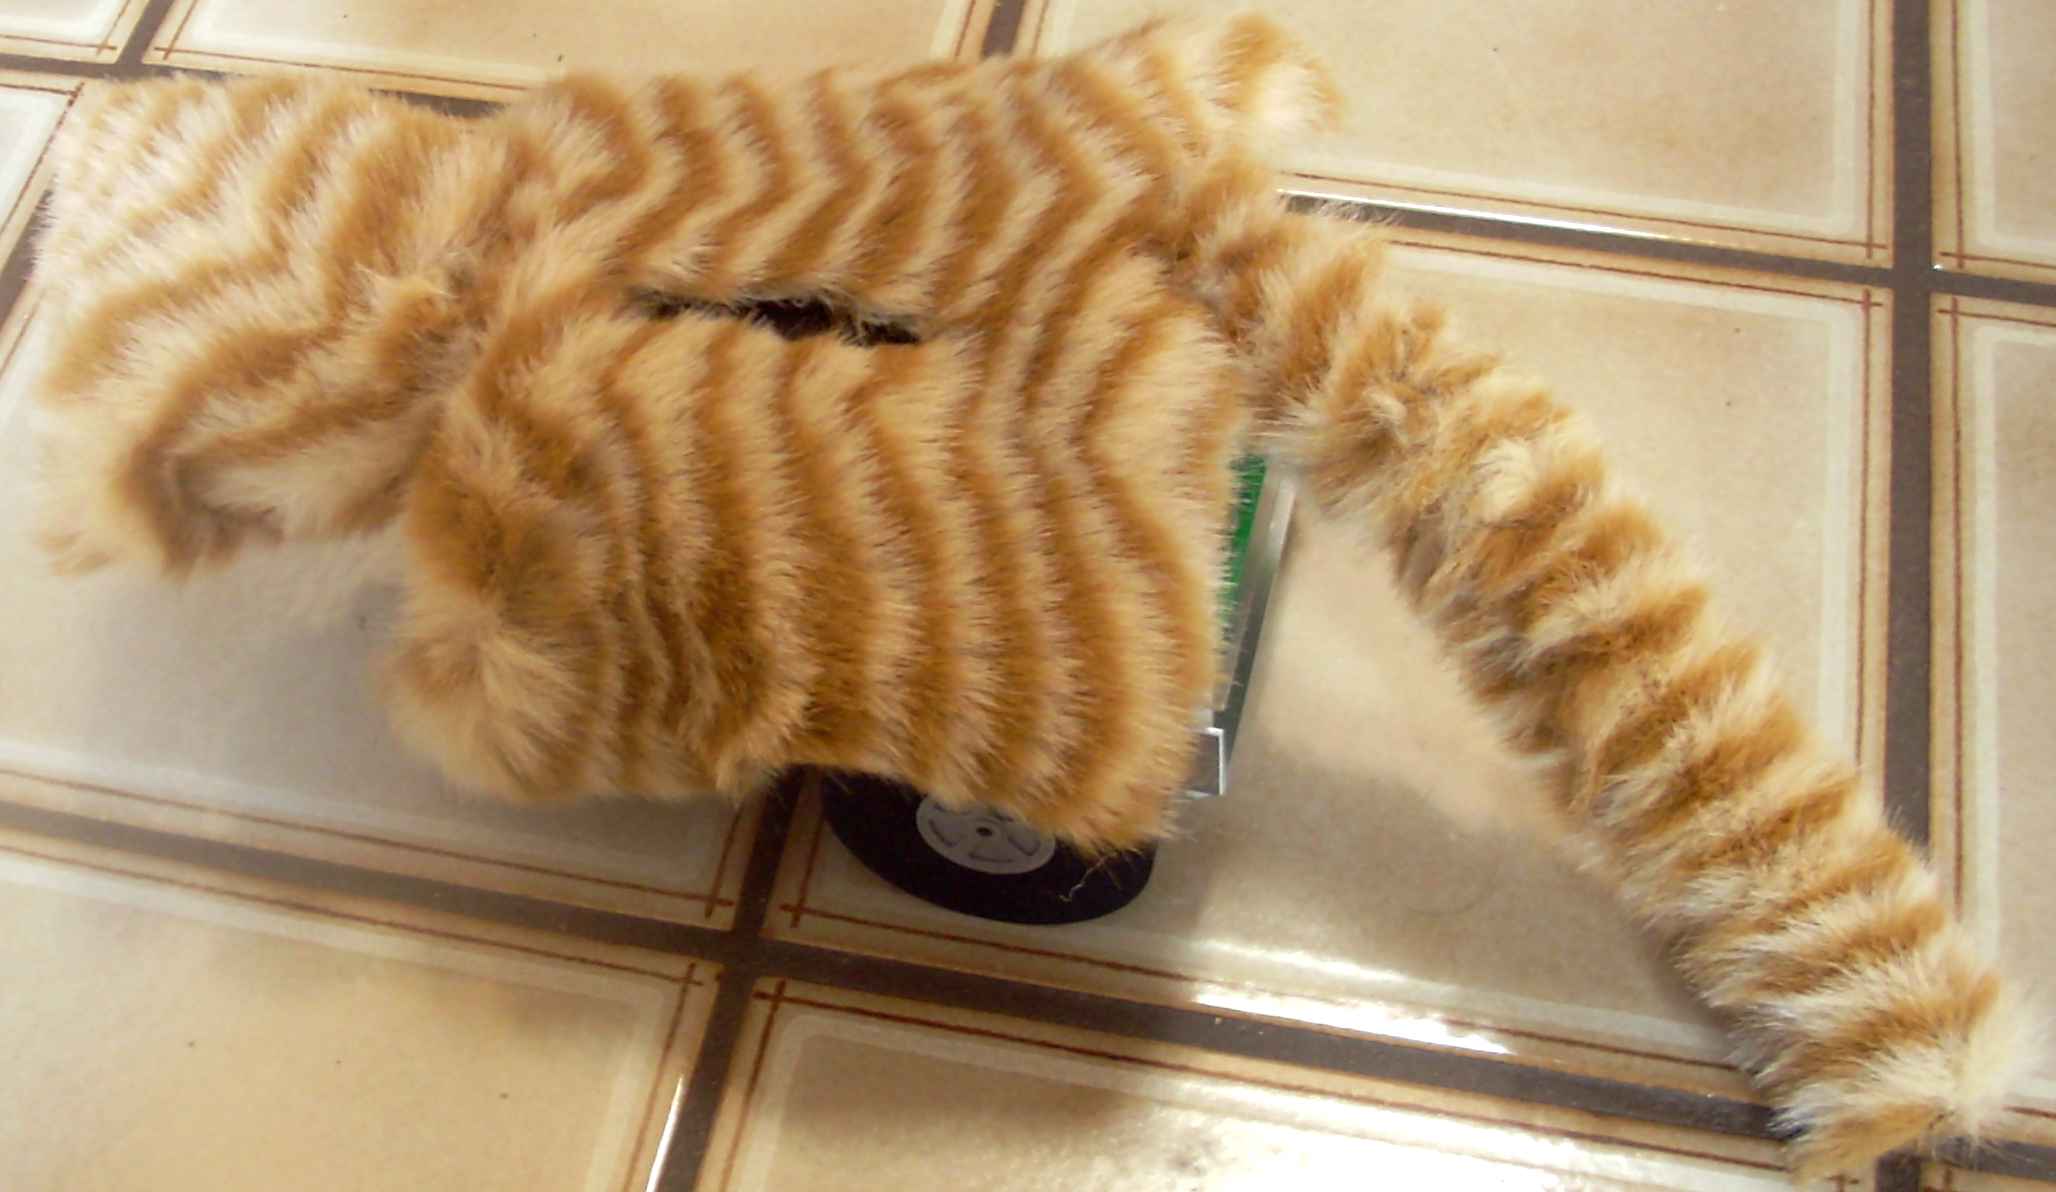 Top view, showing the top of the head and the tail.  It has orange stripey fur, and looks kind of boxy, and you can see a wheel, and there's a rectangular hole in the top (for the display).